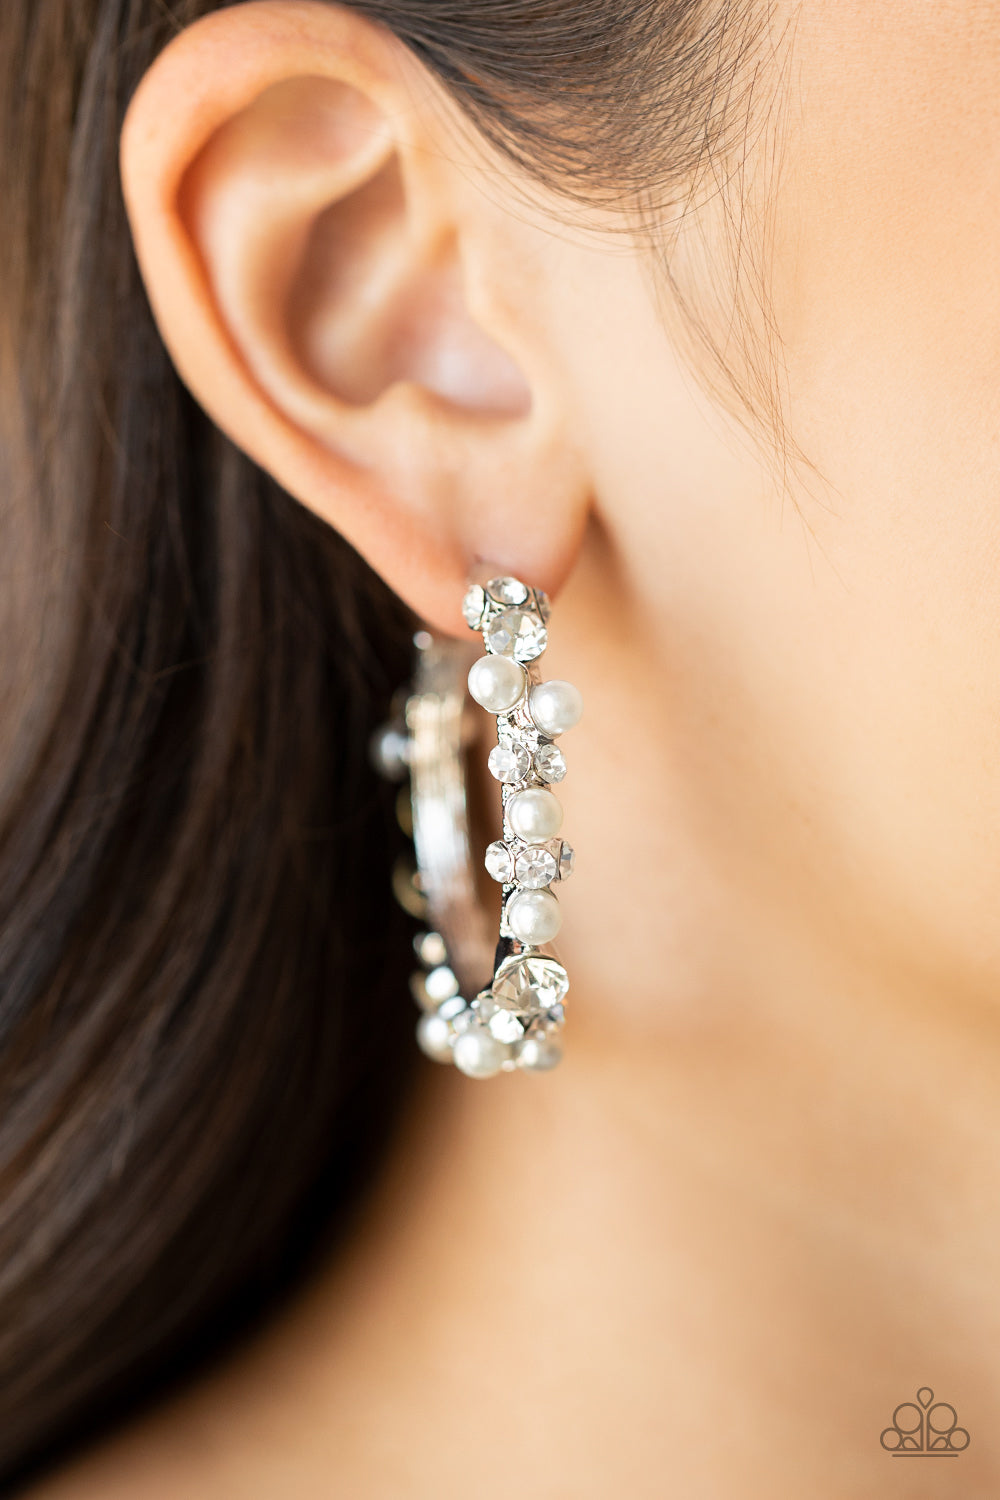 Let There Be SOCIALITE White Hoop Earring - Paparazzi Accessories  A bubbly array of classic white rhinestones and glassy white rhinestones are encrusted along the front of a silver hoop, creating an elegantly effervescent look. Earring attaches to a standard post fitting. Hoop measures approximately 1 1/2" in diameter.  All Paparazzi Accessories are lead free and nickel free!  Sold as one pair of hoop earrings.